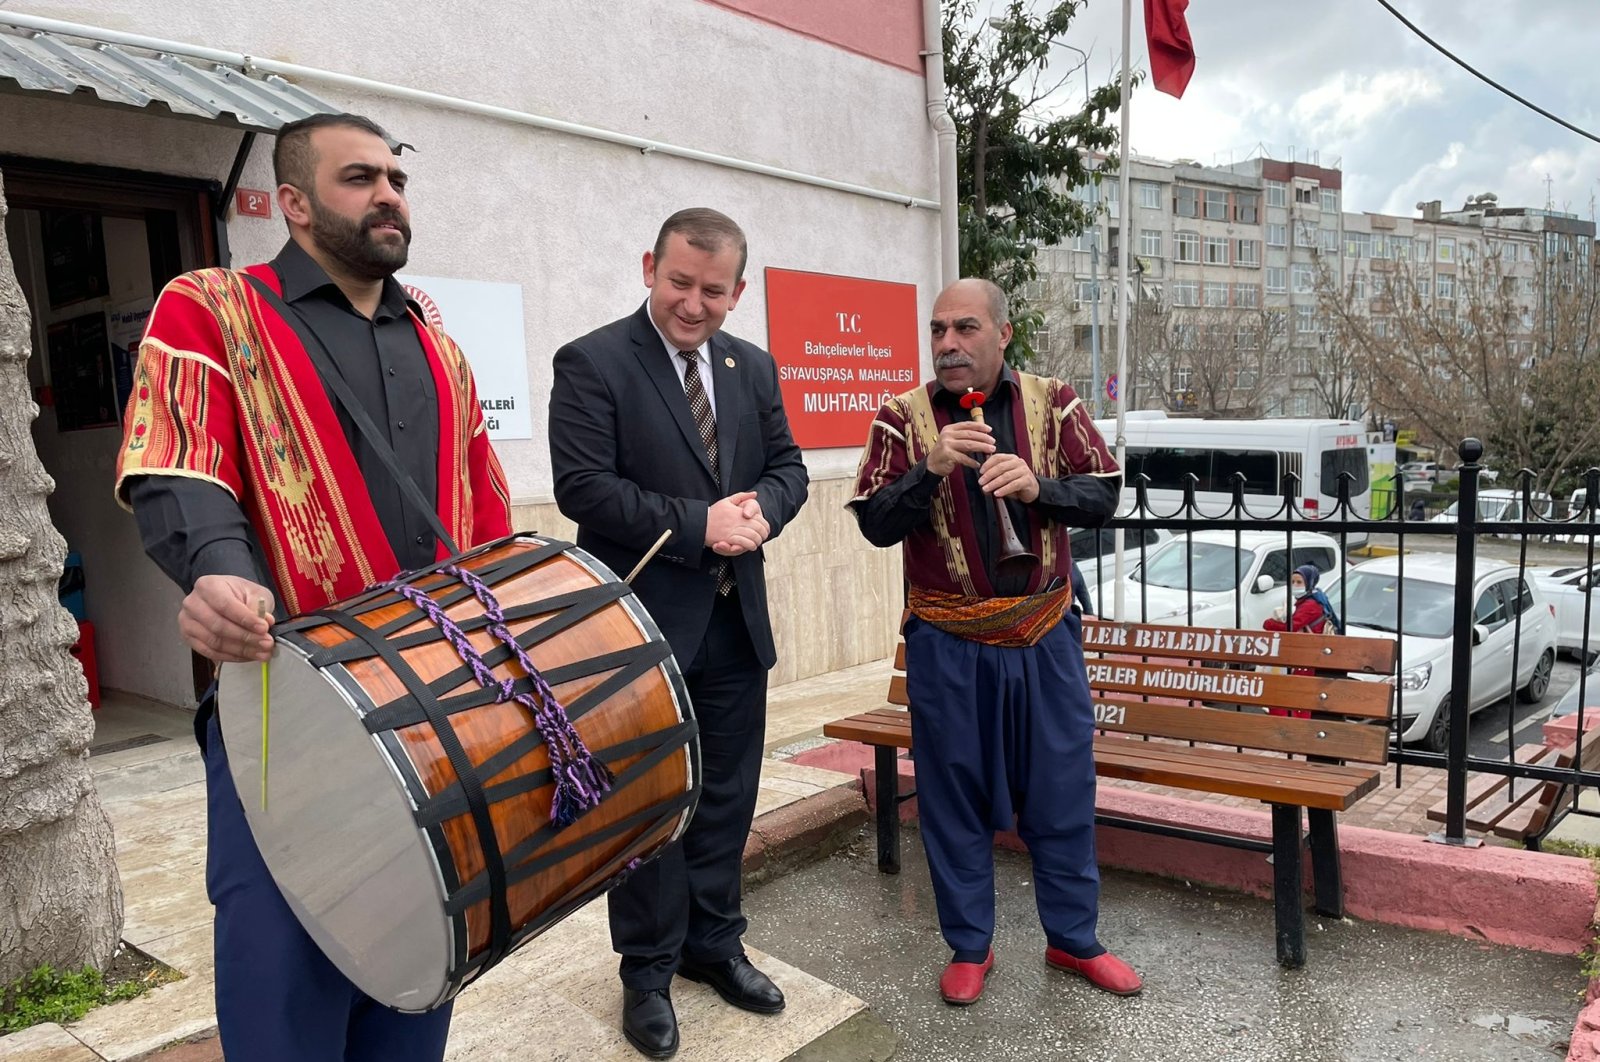 Drummers Ali Bulur (R) and Muharrem Bulur (L) pose with Selami Aykut, head of the federation of mukhtars, in Istanbul, Turkey, March 24, 2022. (AA PHOTO)